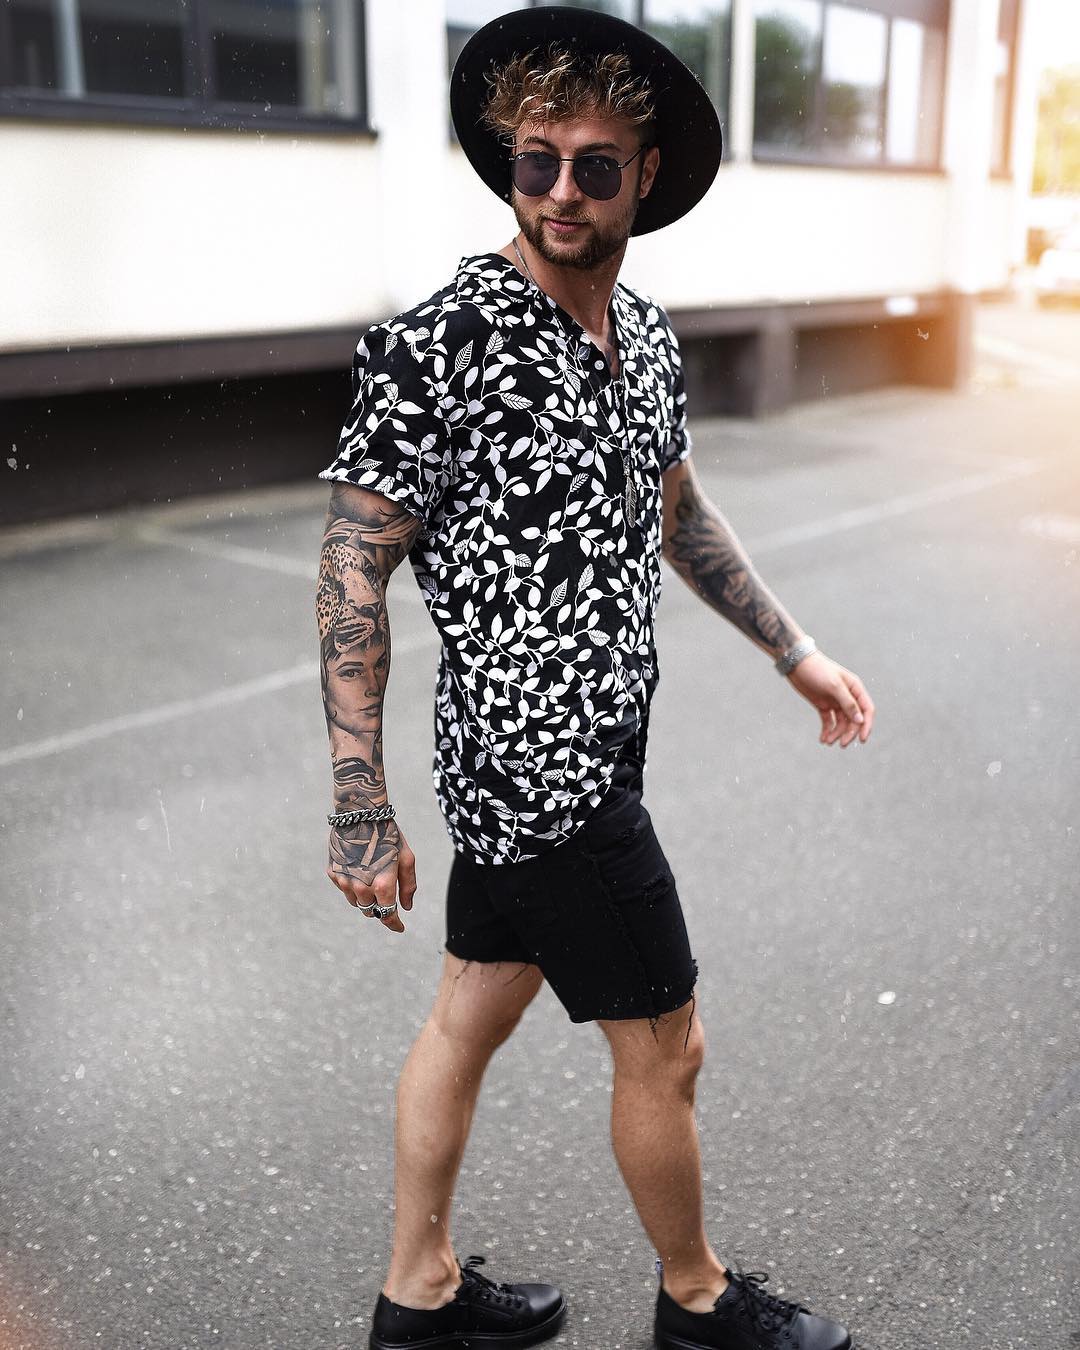 30 Summer Street Outfit Ideas for Men [with Images] | Page 22 of 35